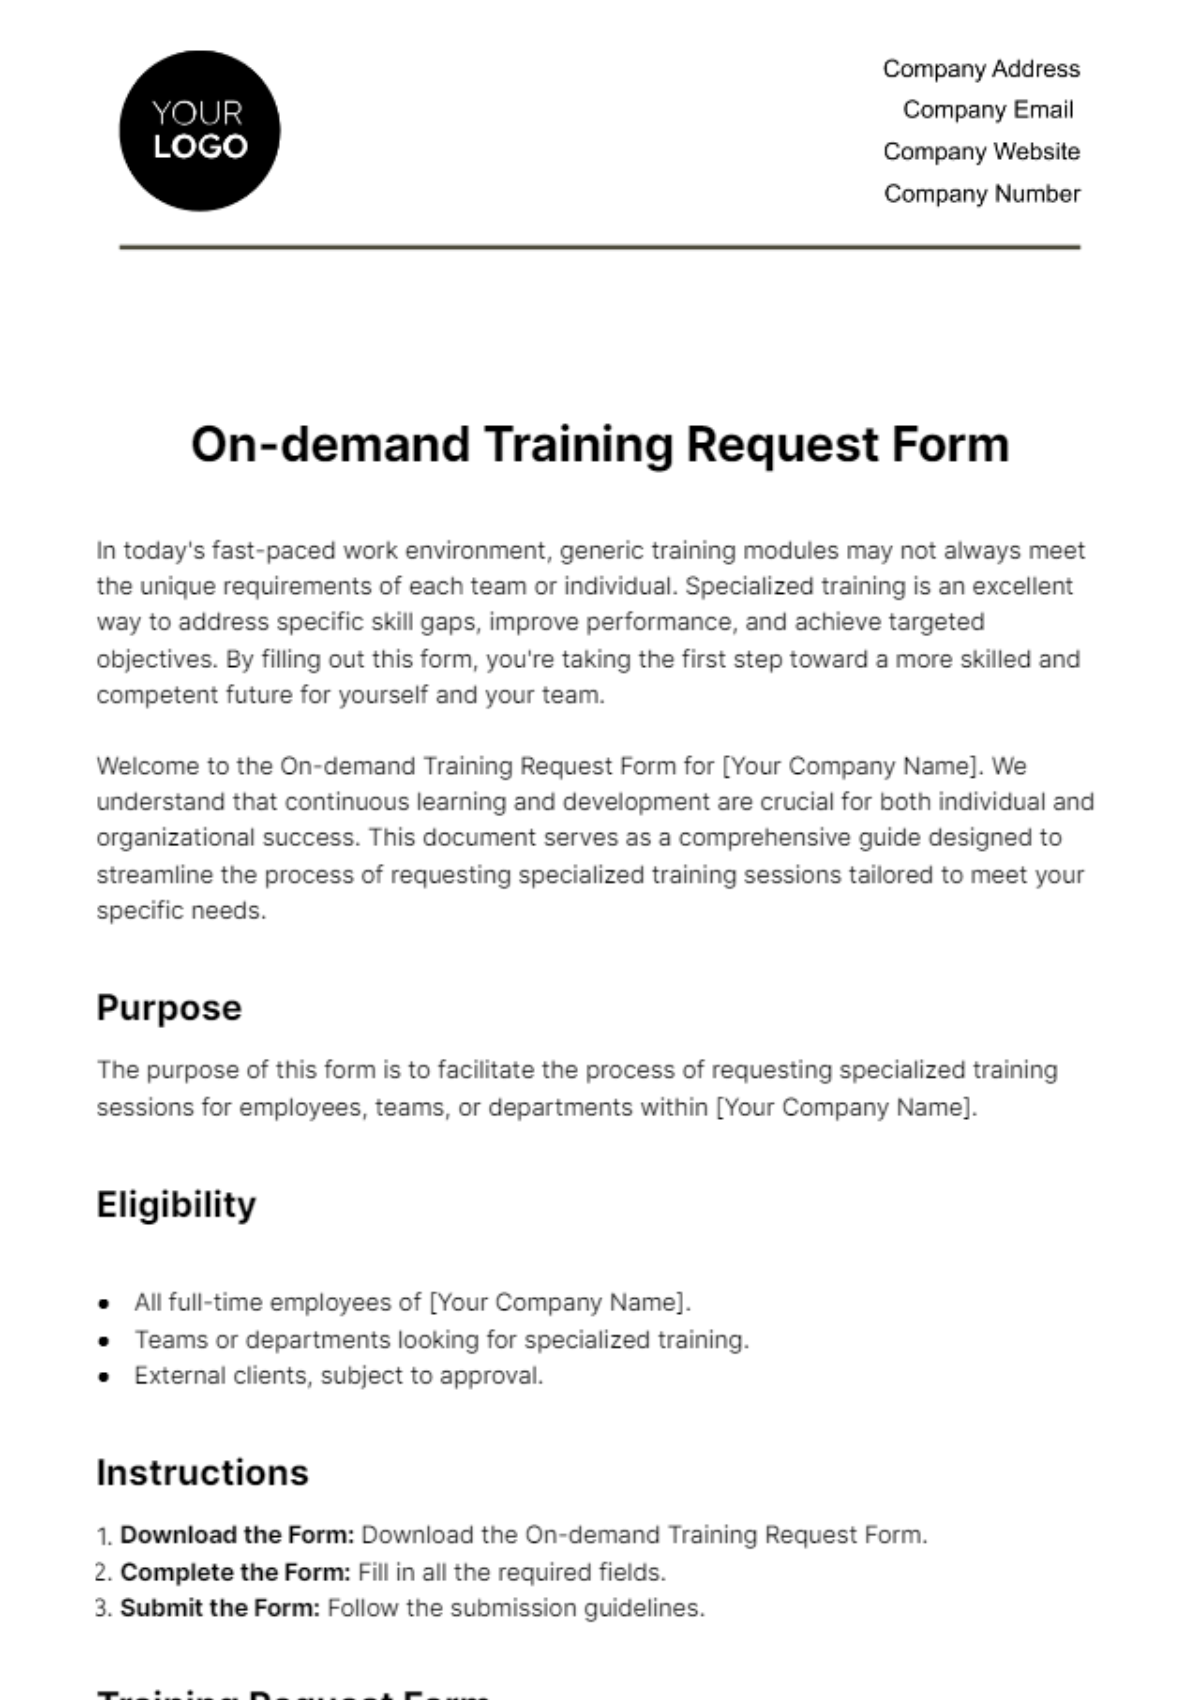 Free On-demand Training Request Form HR Template